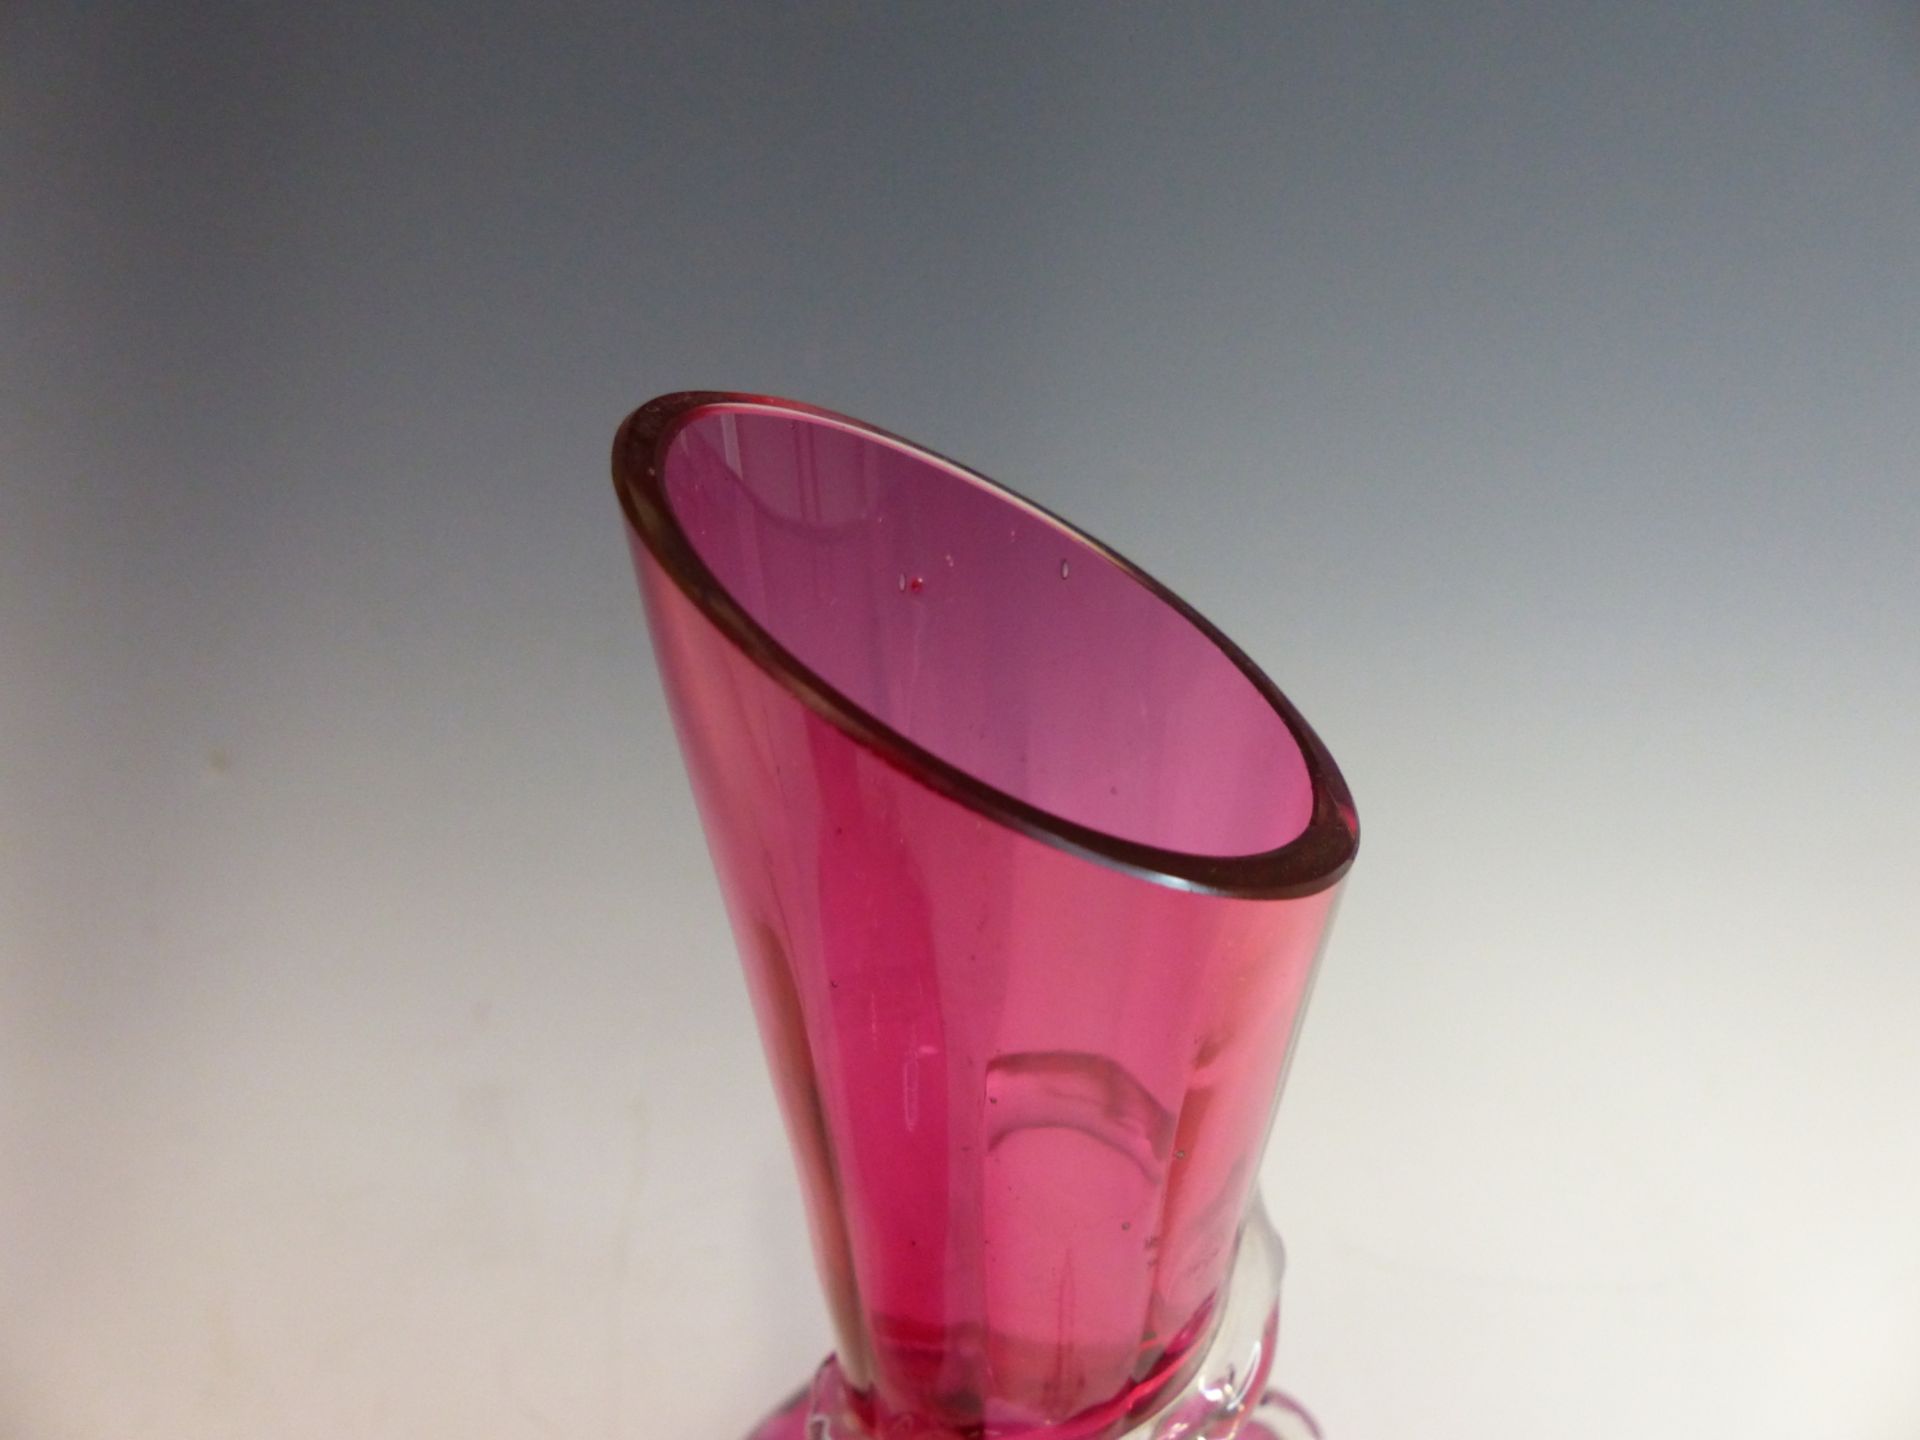 A PAIR OF EARLY 20TH CENTURY CRANBERRY GLASS VASES WITH SPIRAL AND FLOWER DECORATION. - Image 5 of 5